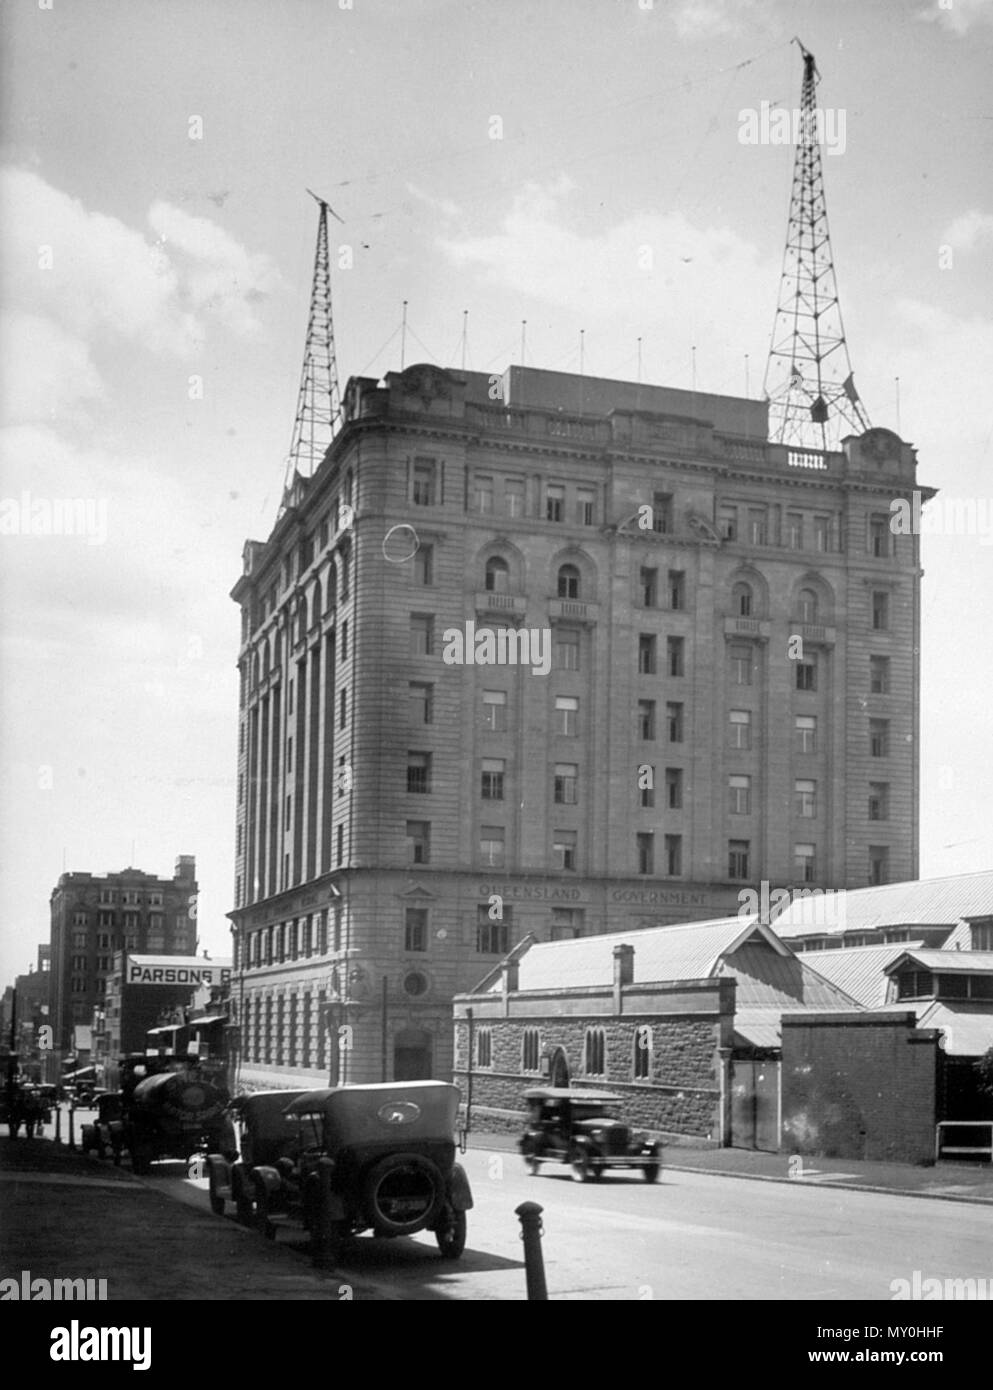 Family Services Building, George Street, Brisbane, September 1926. From the Queensland Heritage Registerid=600111 ) .  Brisbane's first high-rise government office building was constructed between 1914 and 1922. It was intended partly as general public offices, but more importantly as state headquarters for the enormously successful Queensland Government Savings Bank, established in 1864.  Bank headquarters had occupied a purpose-designed banking chamber and offices in the second wing of the Treasury Building from early 1893. By 1912 these premises were no longer adequate. In consequence, the  Stock Photo